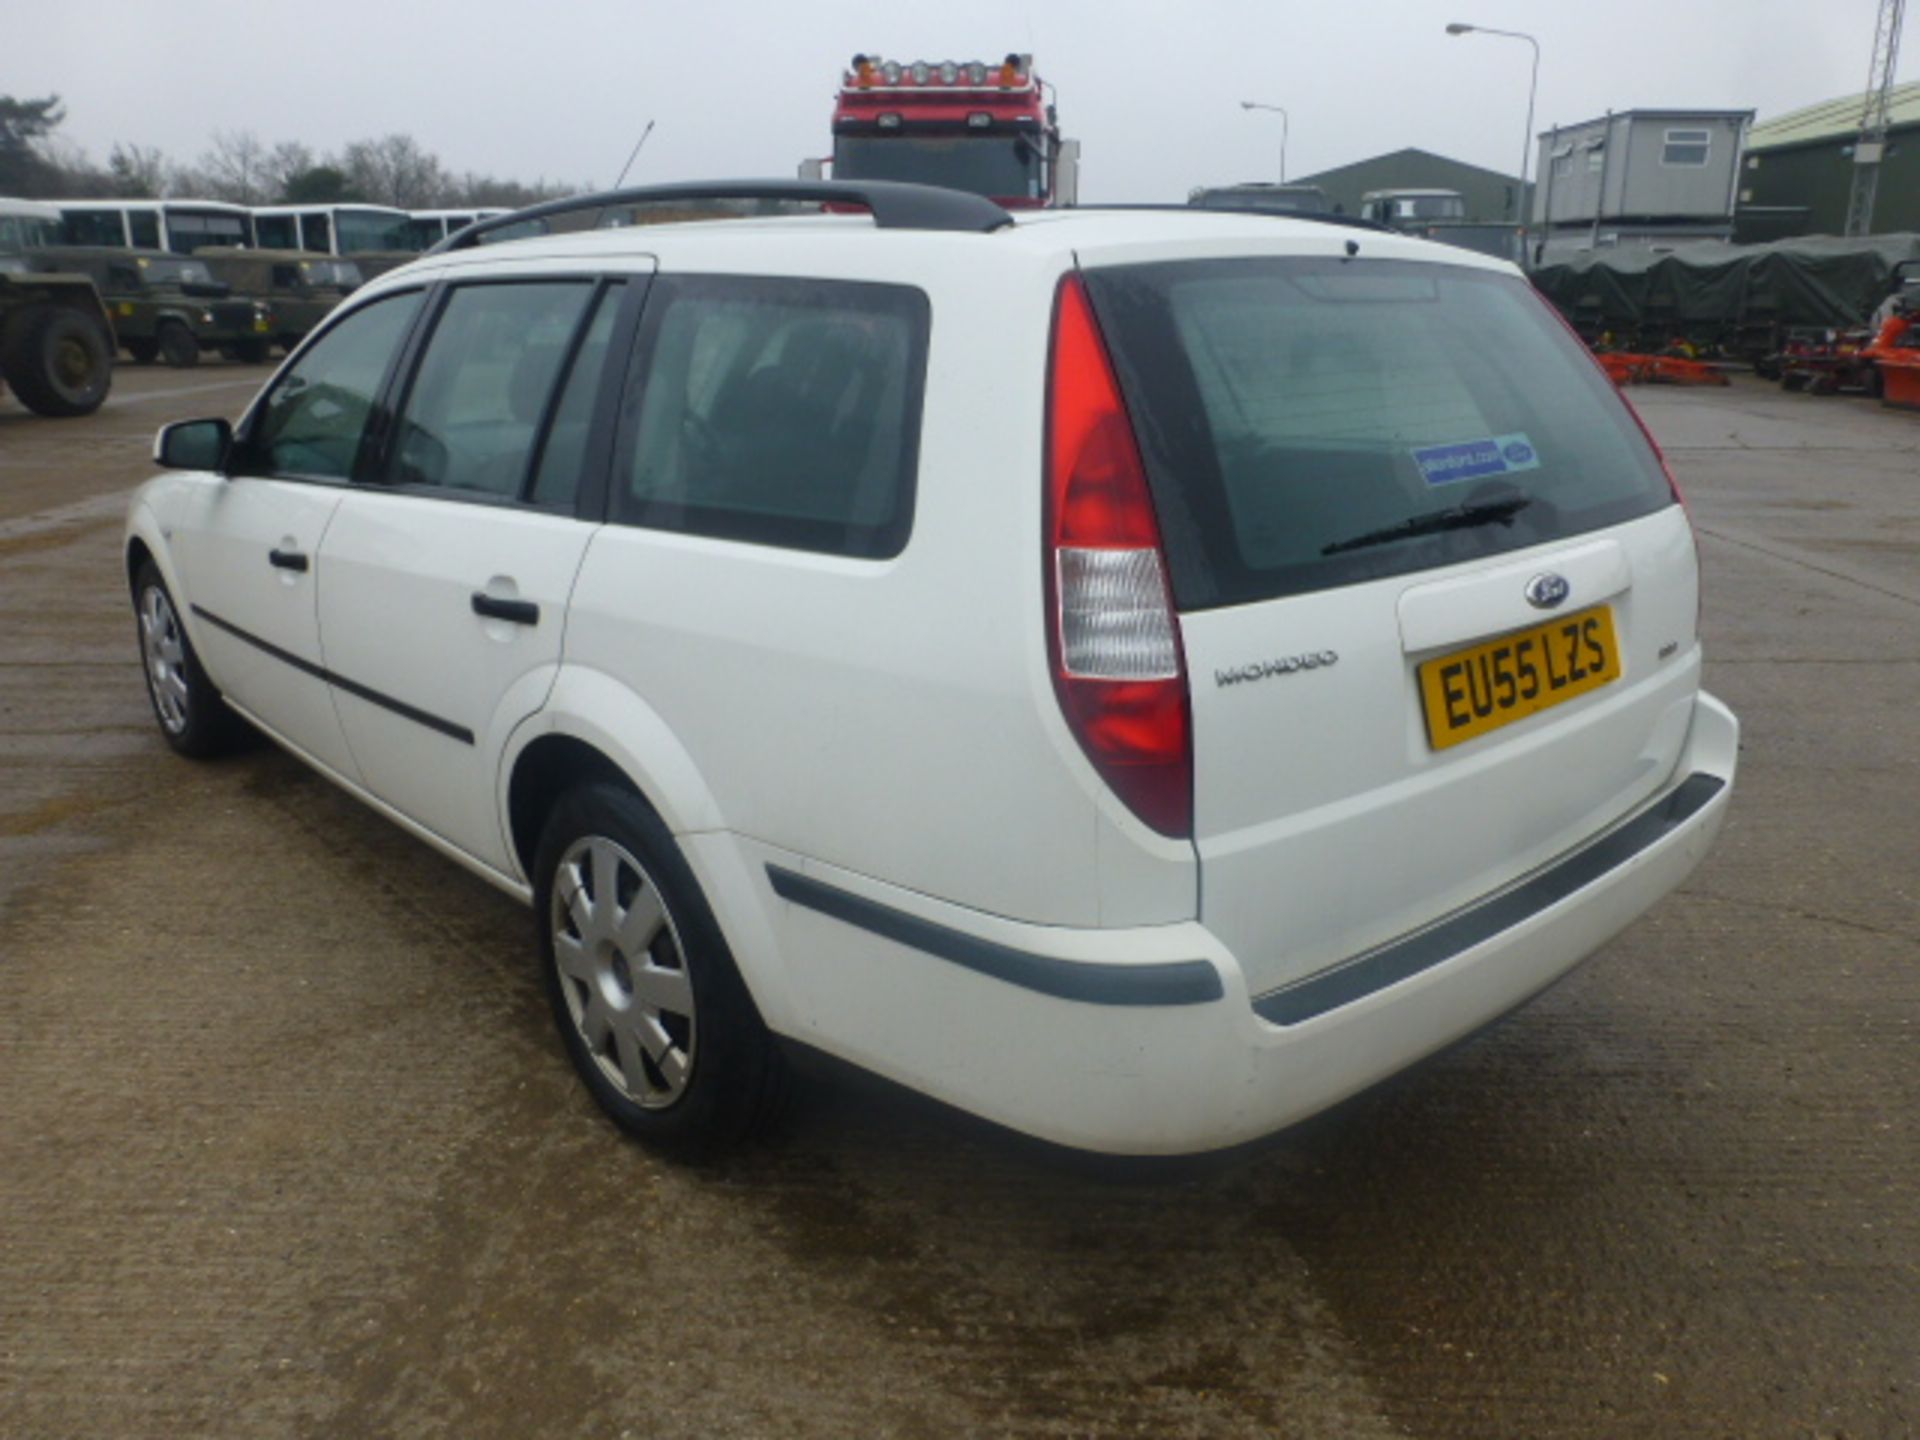 Ford Mondeo 2.0TDCi Estate - Image 6 of 16